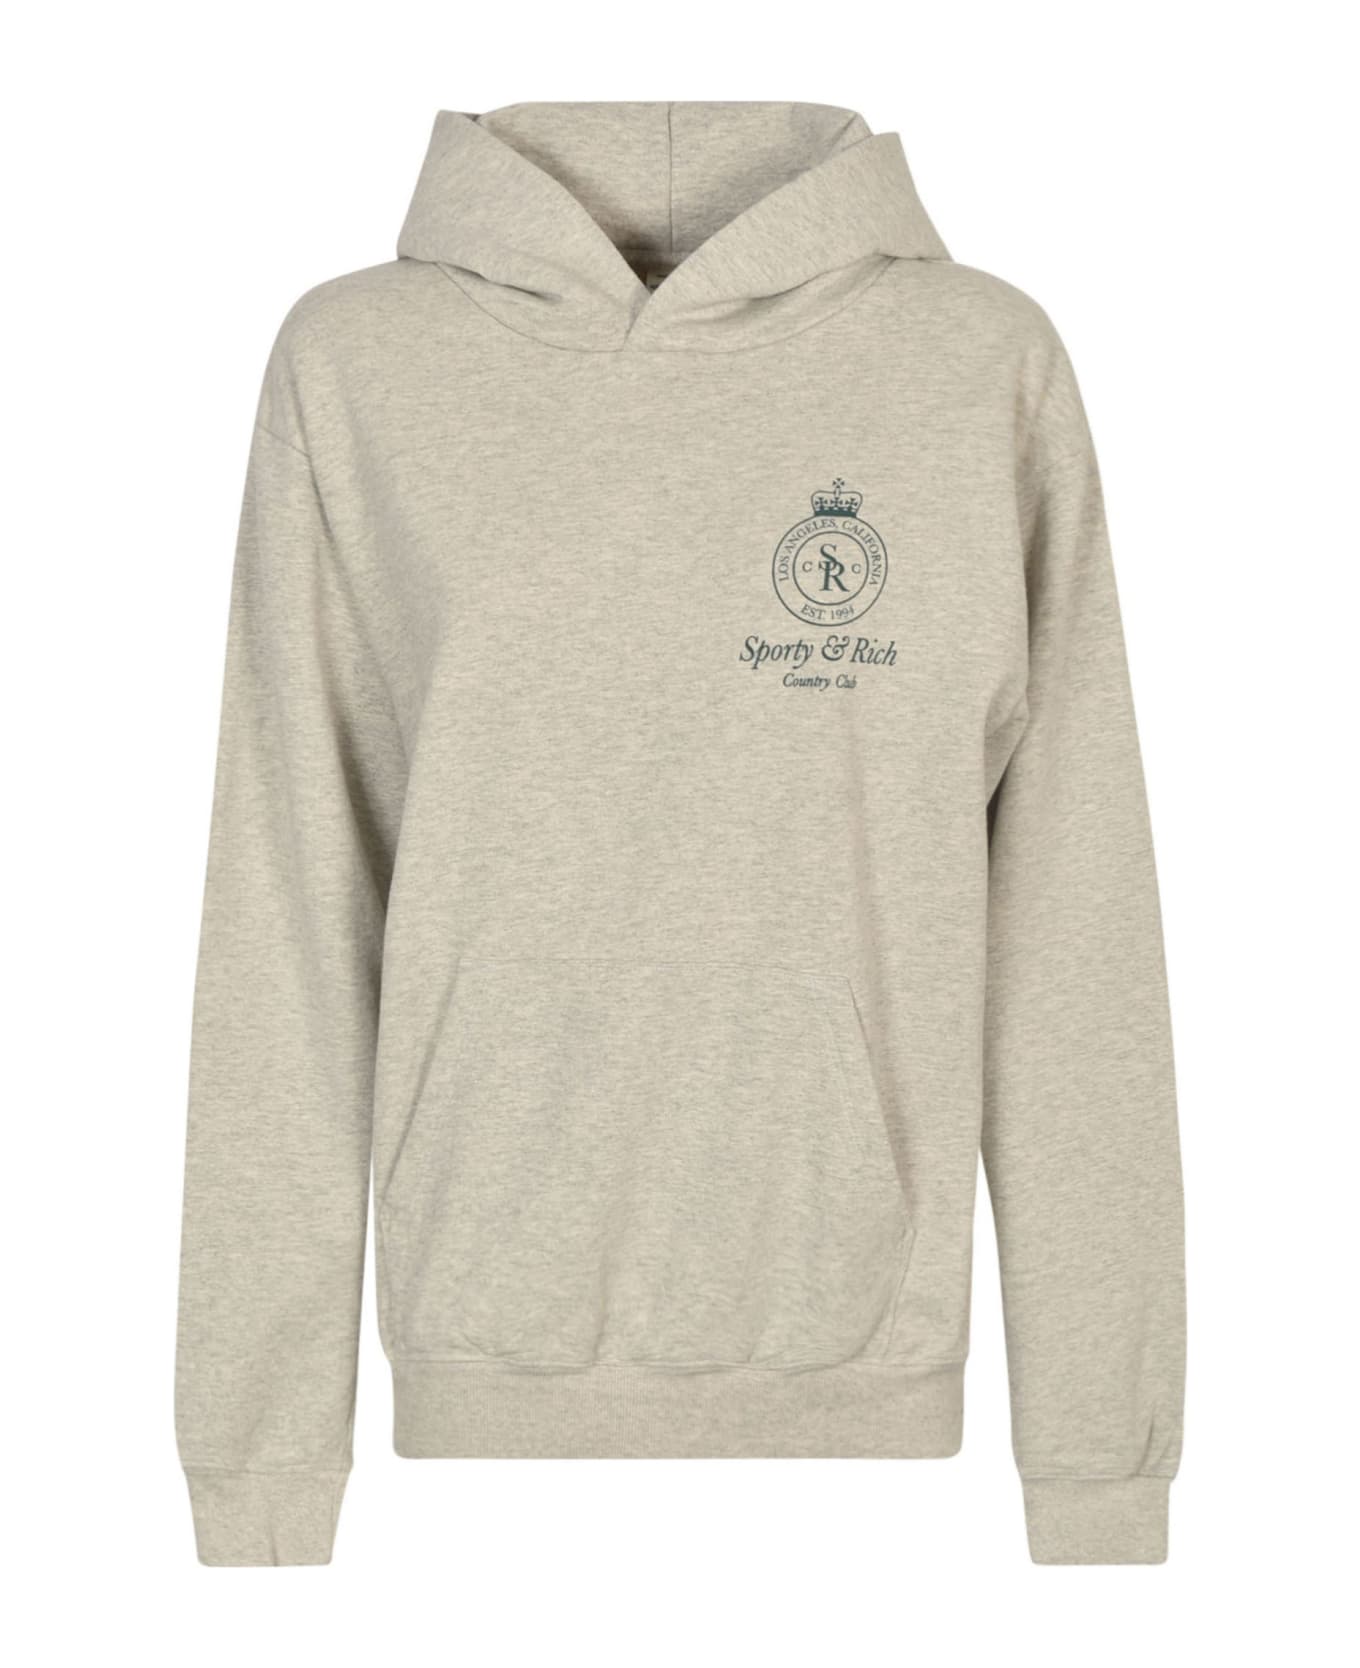 Sporty & Rich Chest Logo Hoodie - Heather Oatmeal/Forest